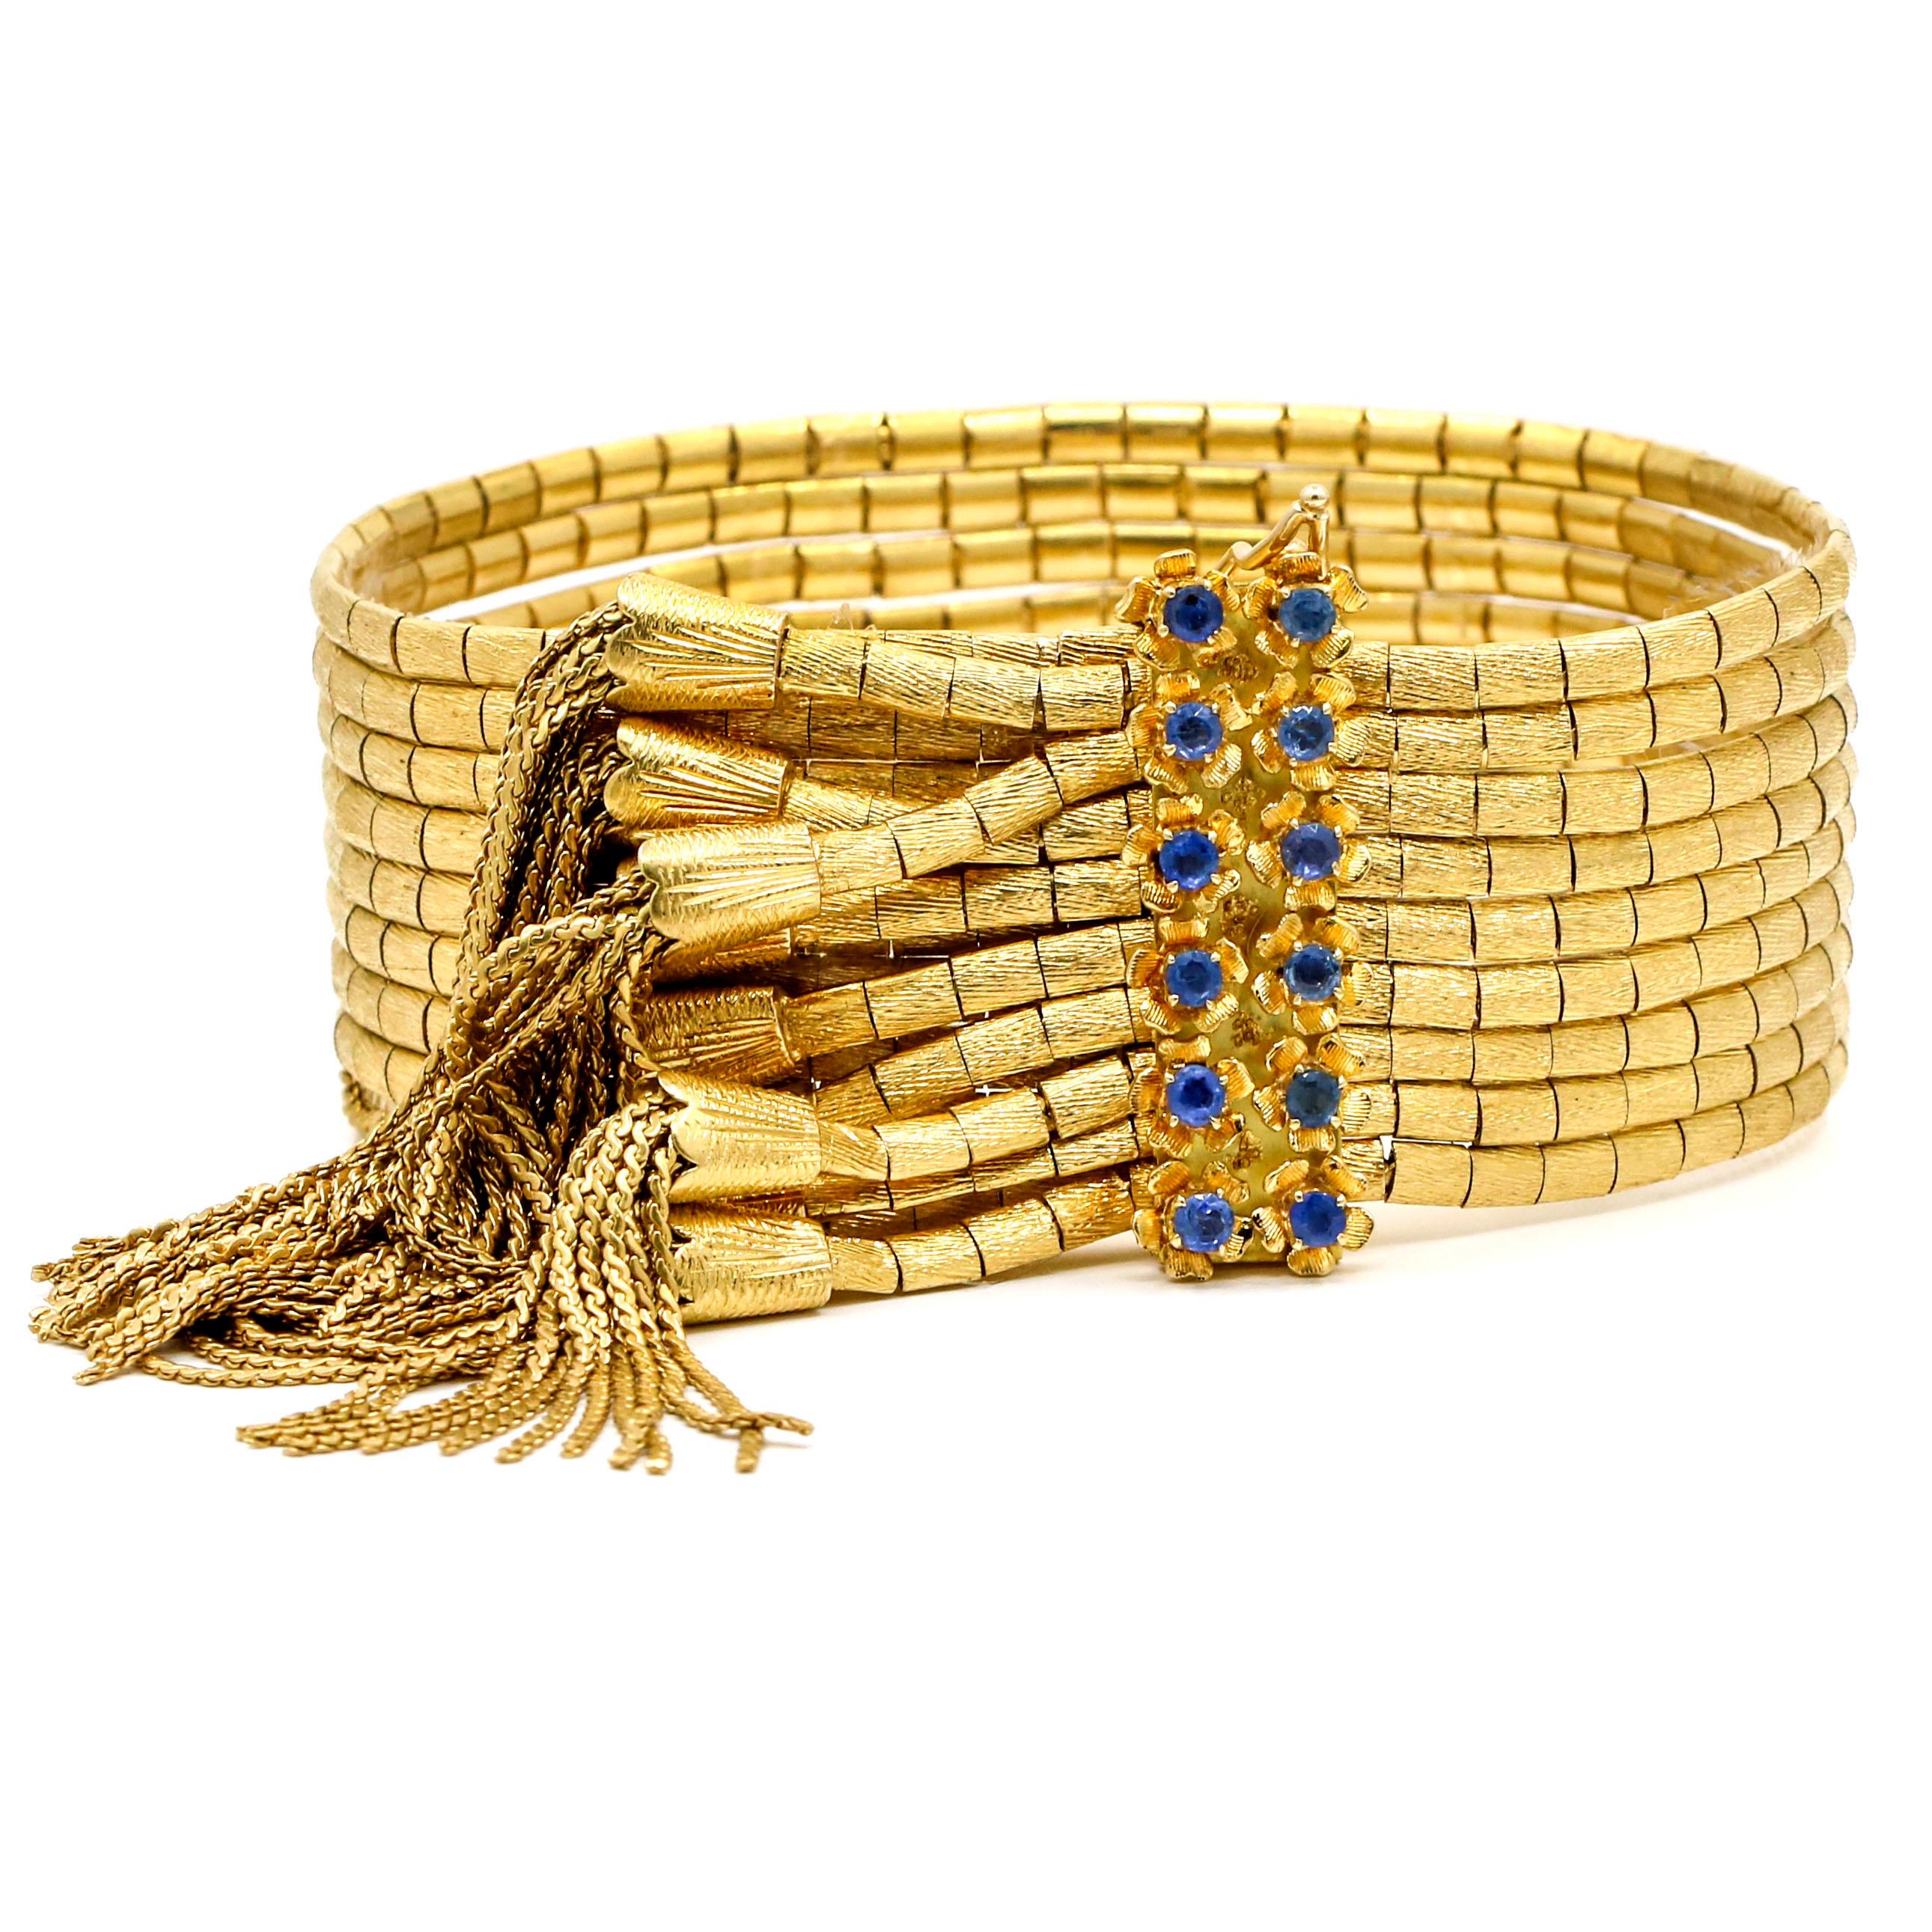 Multi-strand bracelet in 18-karat yellow gold with blue sapphires. The bracelet has 9 strands that are made out of textured gold links with tassel ends. The clasp has 12 round cut natural sapphires. Made in Italy. Signed 86VI. 

Size, Large (fits a